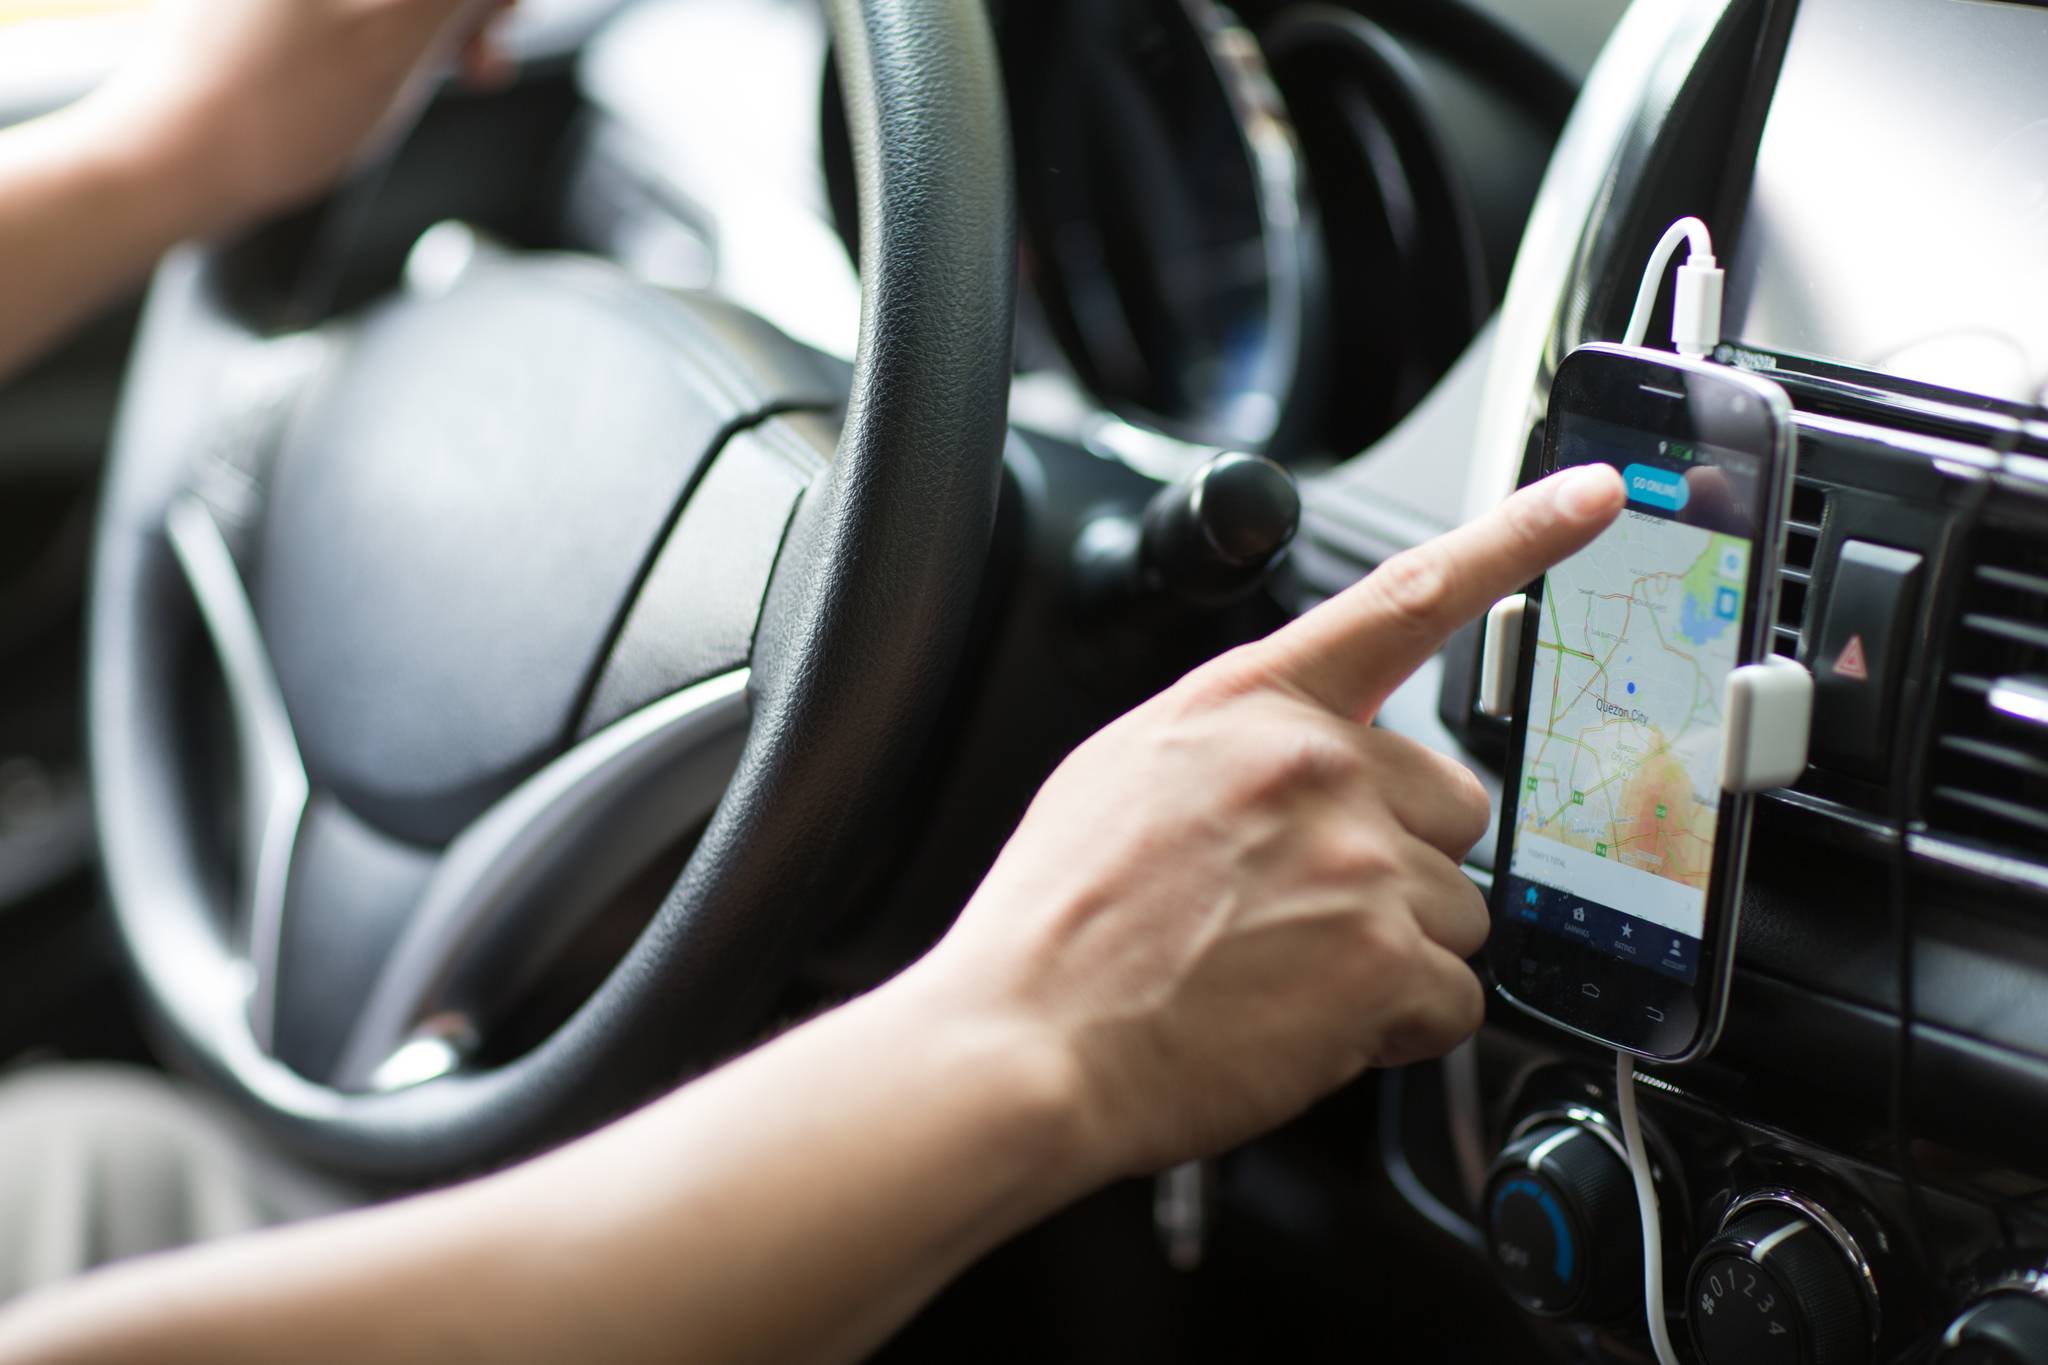 The High Labor Court (TST) has ruled that Uber drivers have no employment relationship with the company but rather a a partnership relationship.